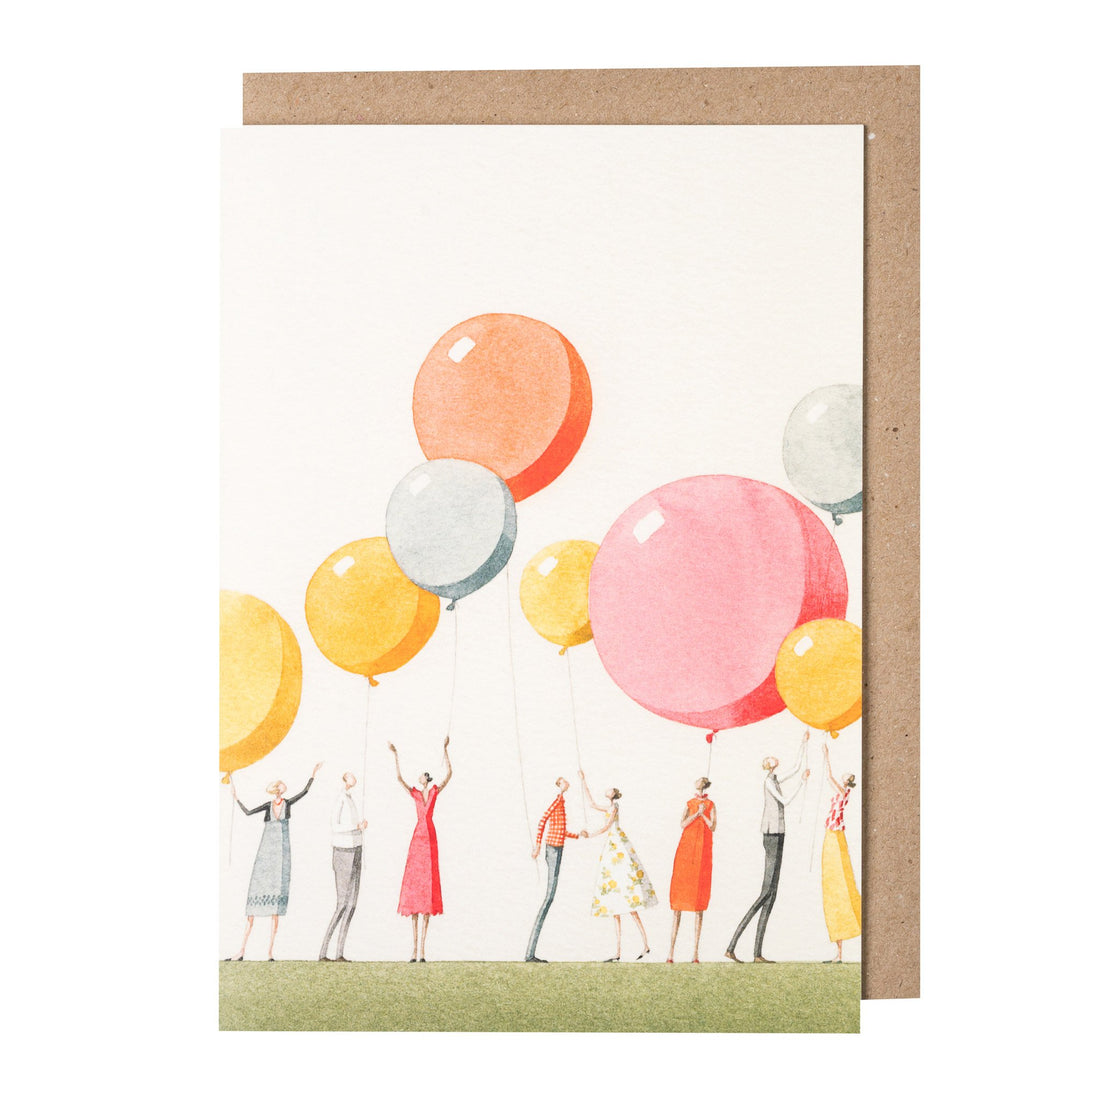 A Balloon Party Greeting Card illustrated by Laura Stoddart with people holding balloons from Hester &amp; Cook.